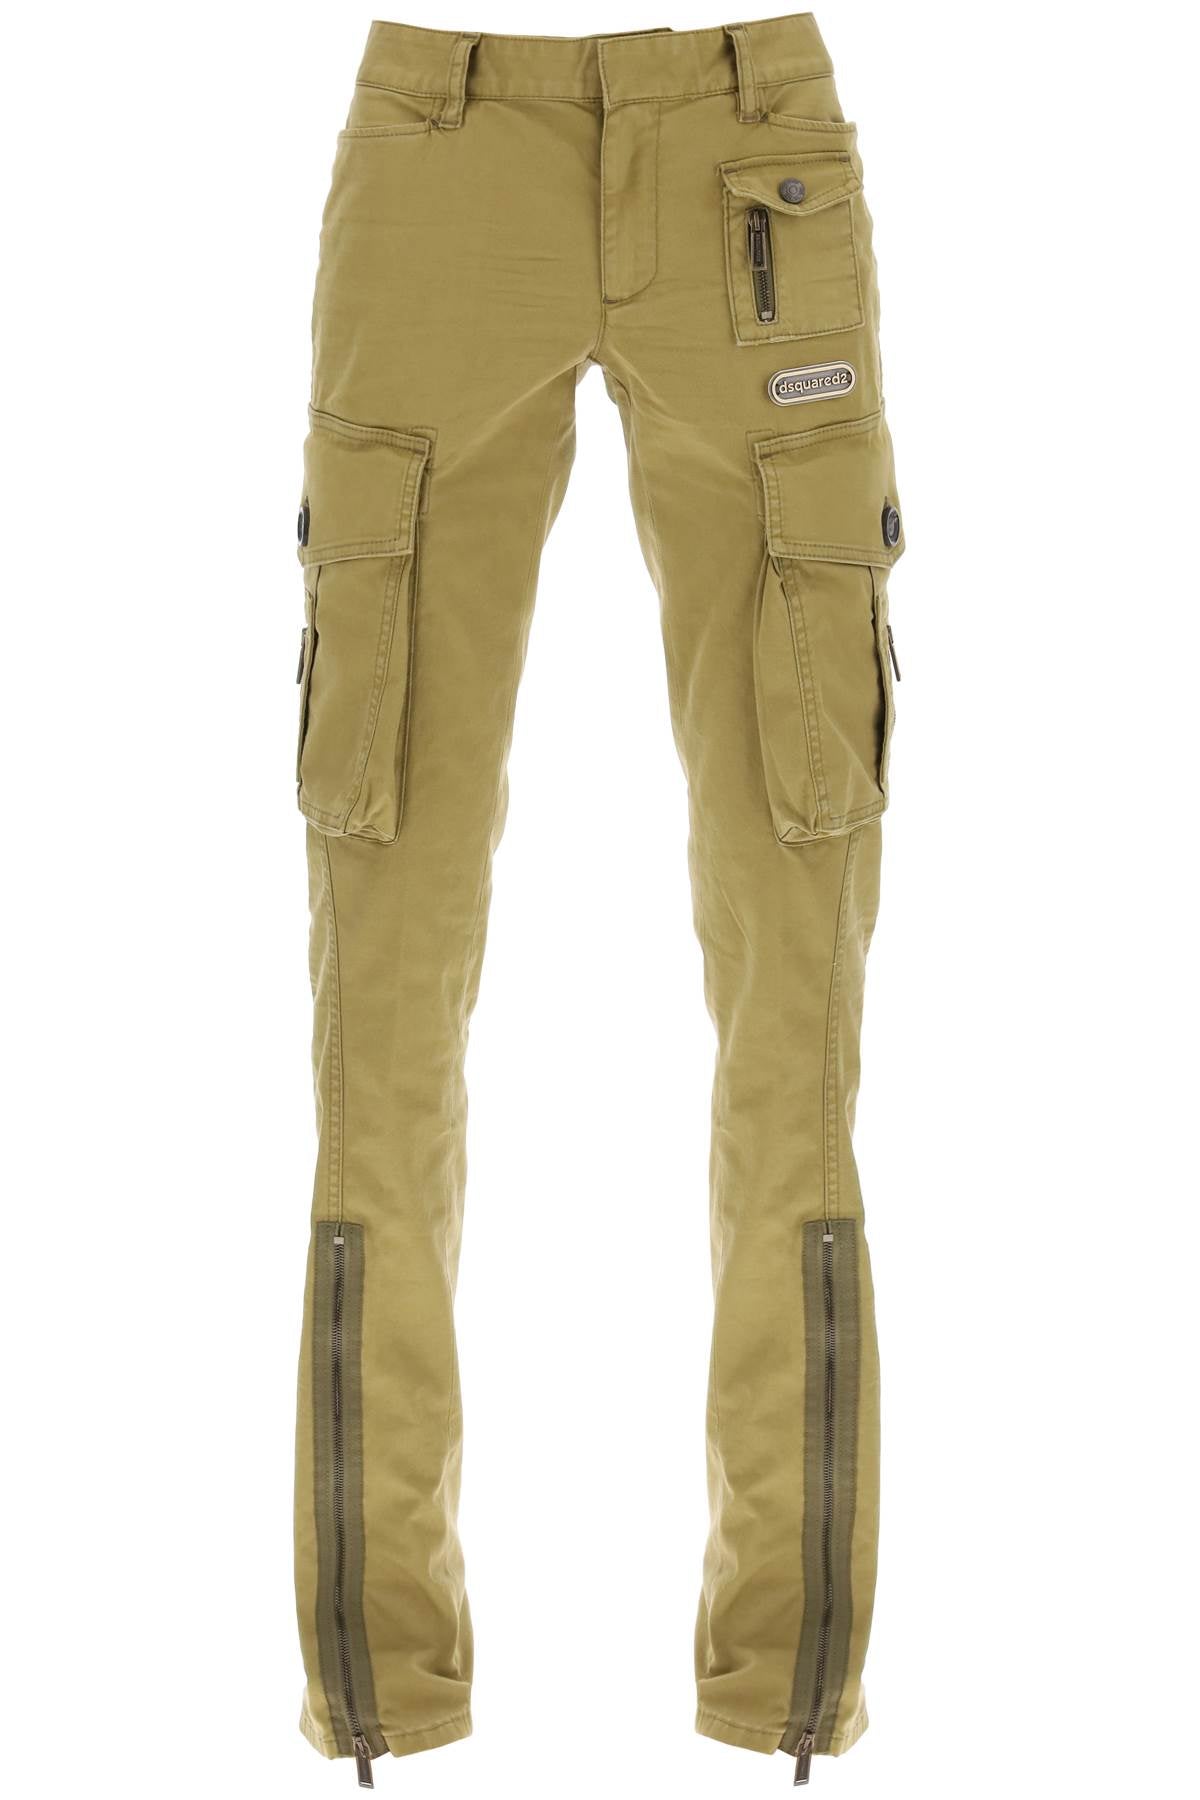 Dsquared2 'flare sexy cargo' pants S75KB0338 S39021 OLIVE GREEN